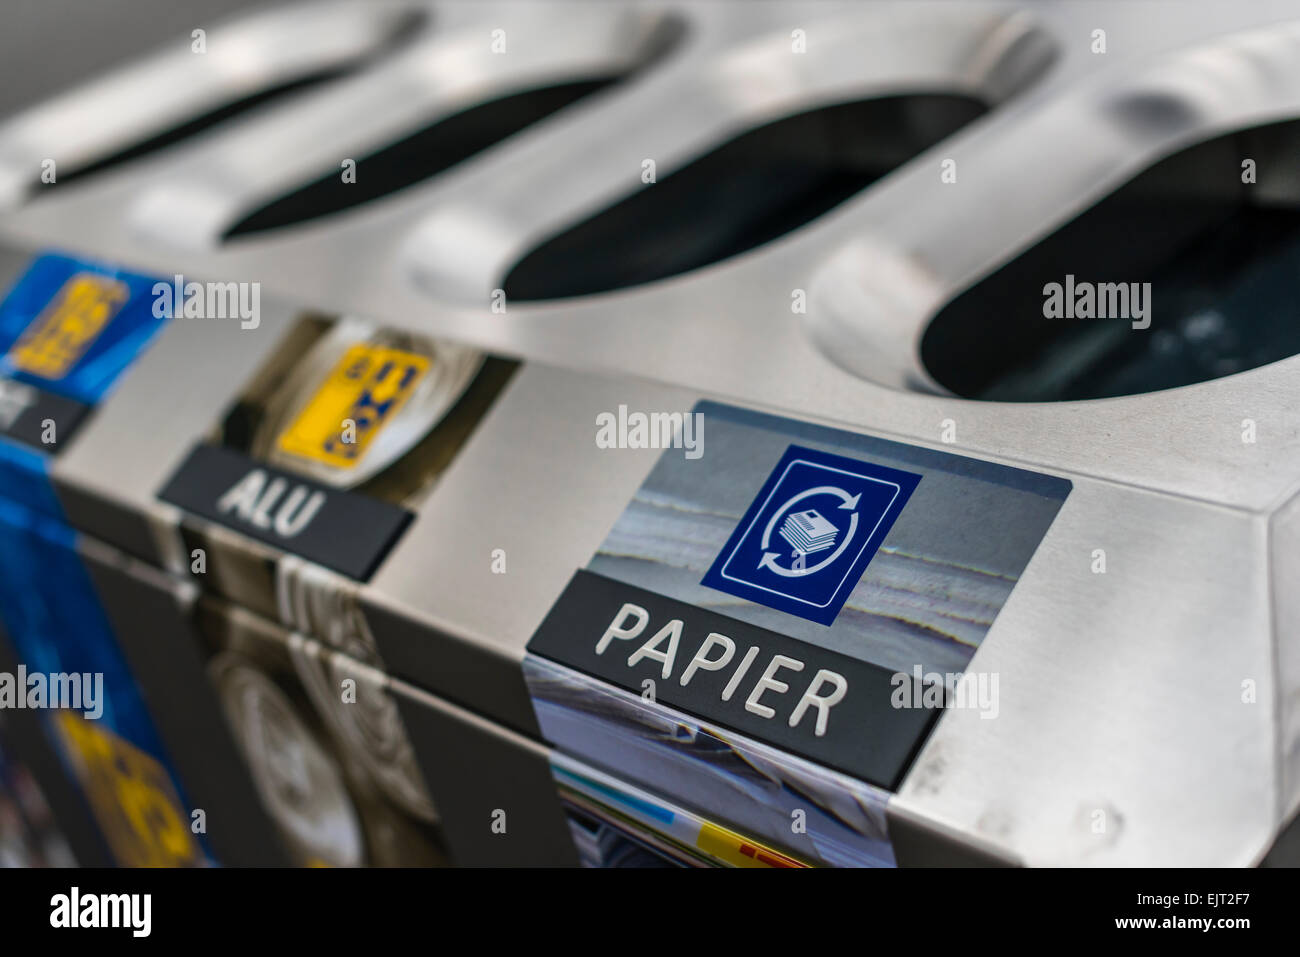 Recycle bin with separate slots for paper, aluminum and glass waste for waste separation at a platform of a Swiss train station. Stock Photo